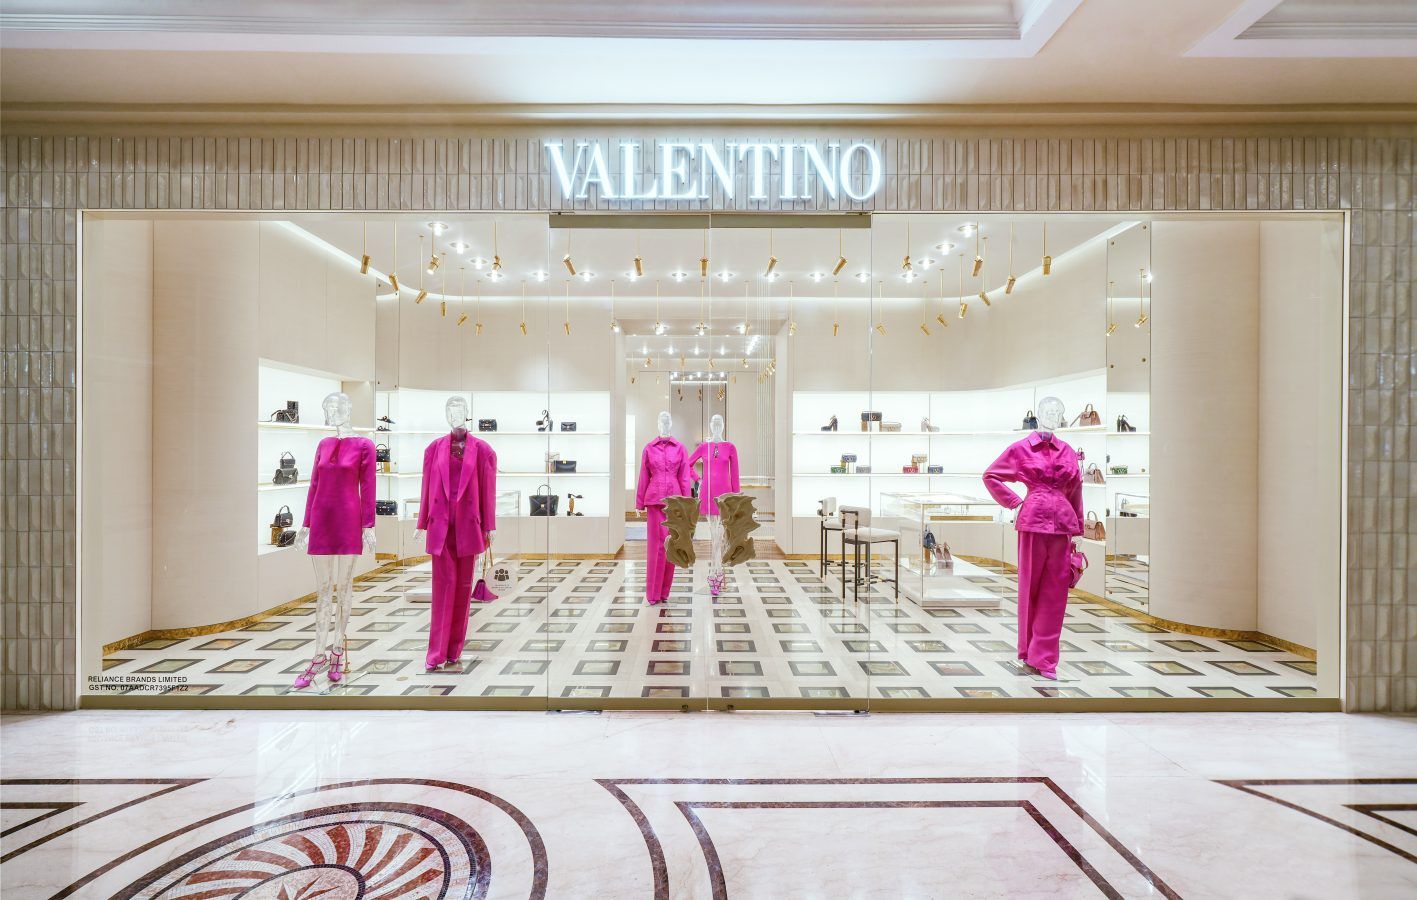 Valentino Is Now Open - Events